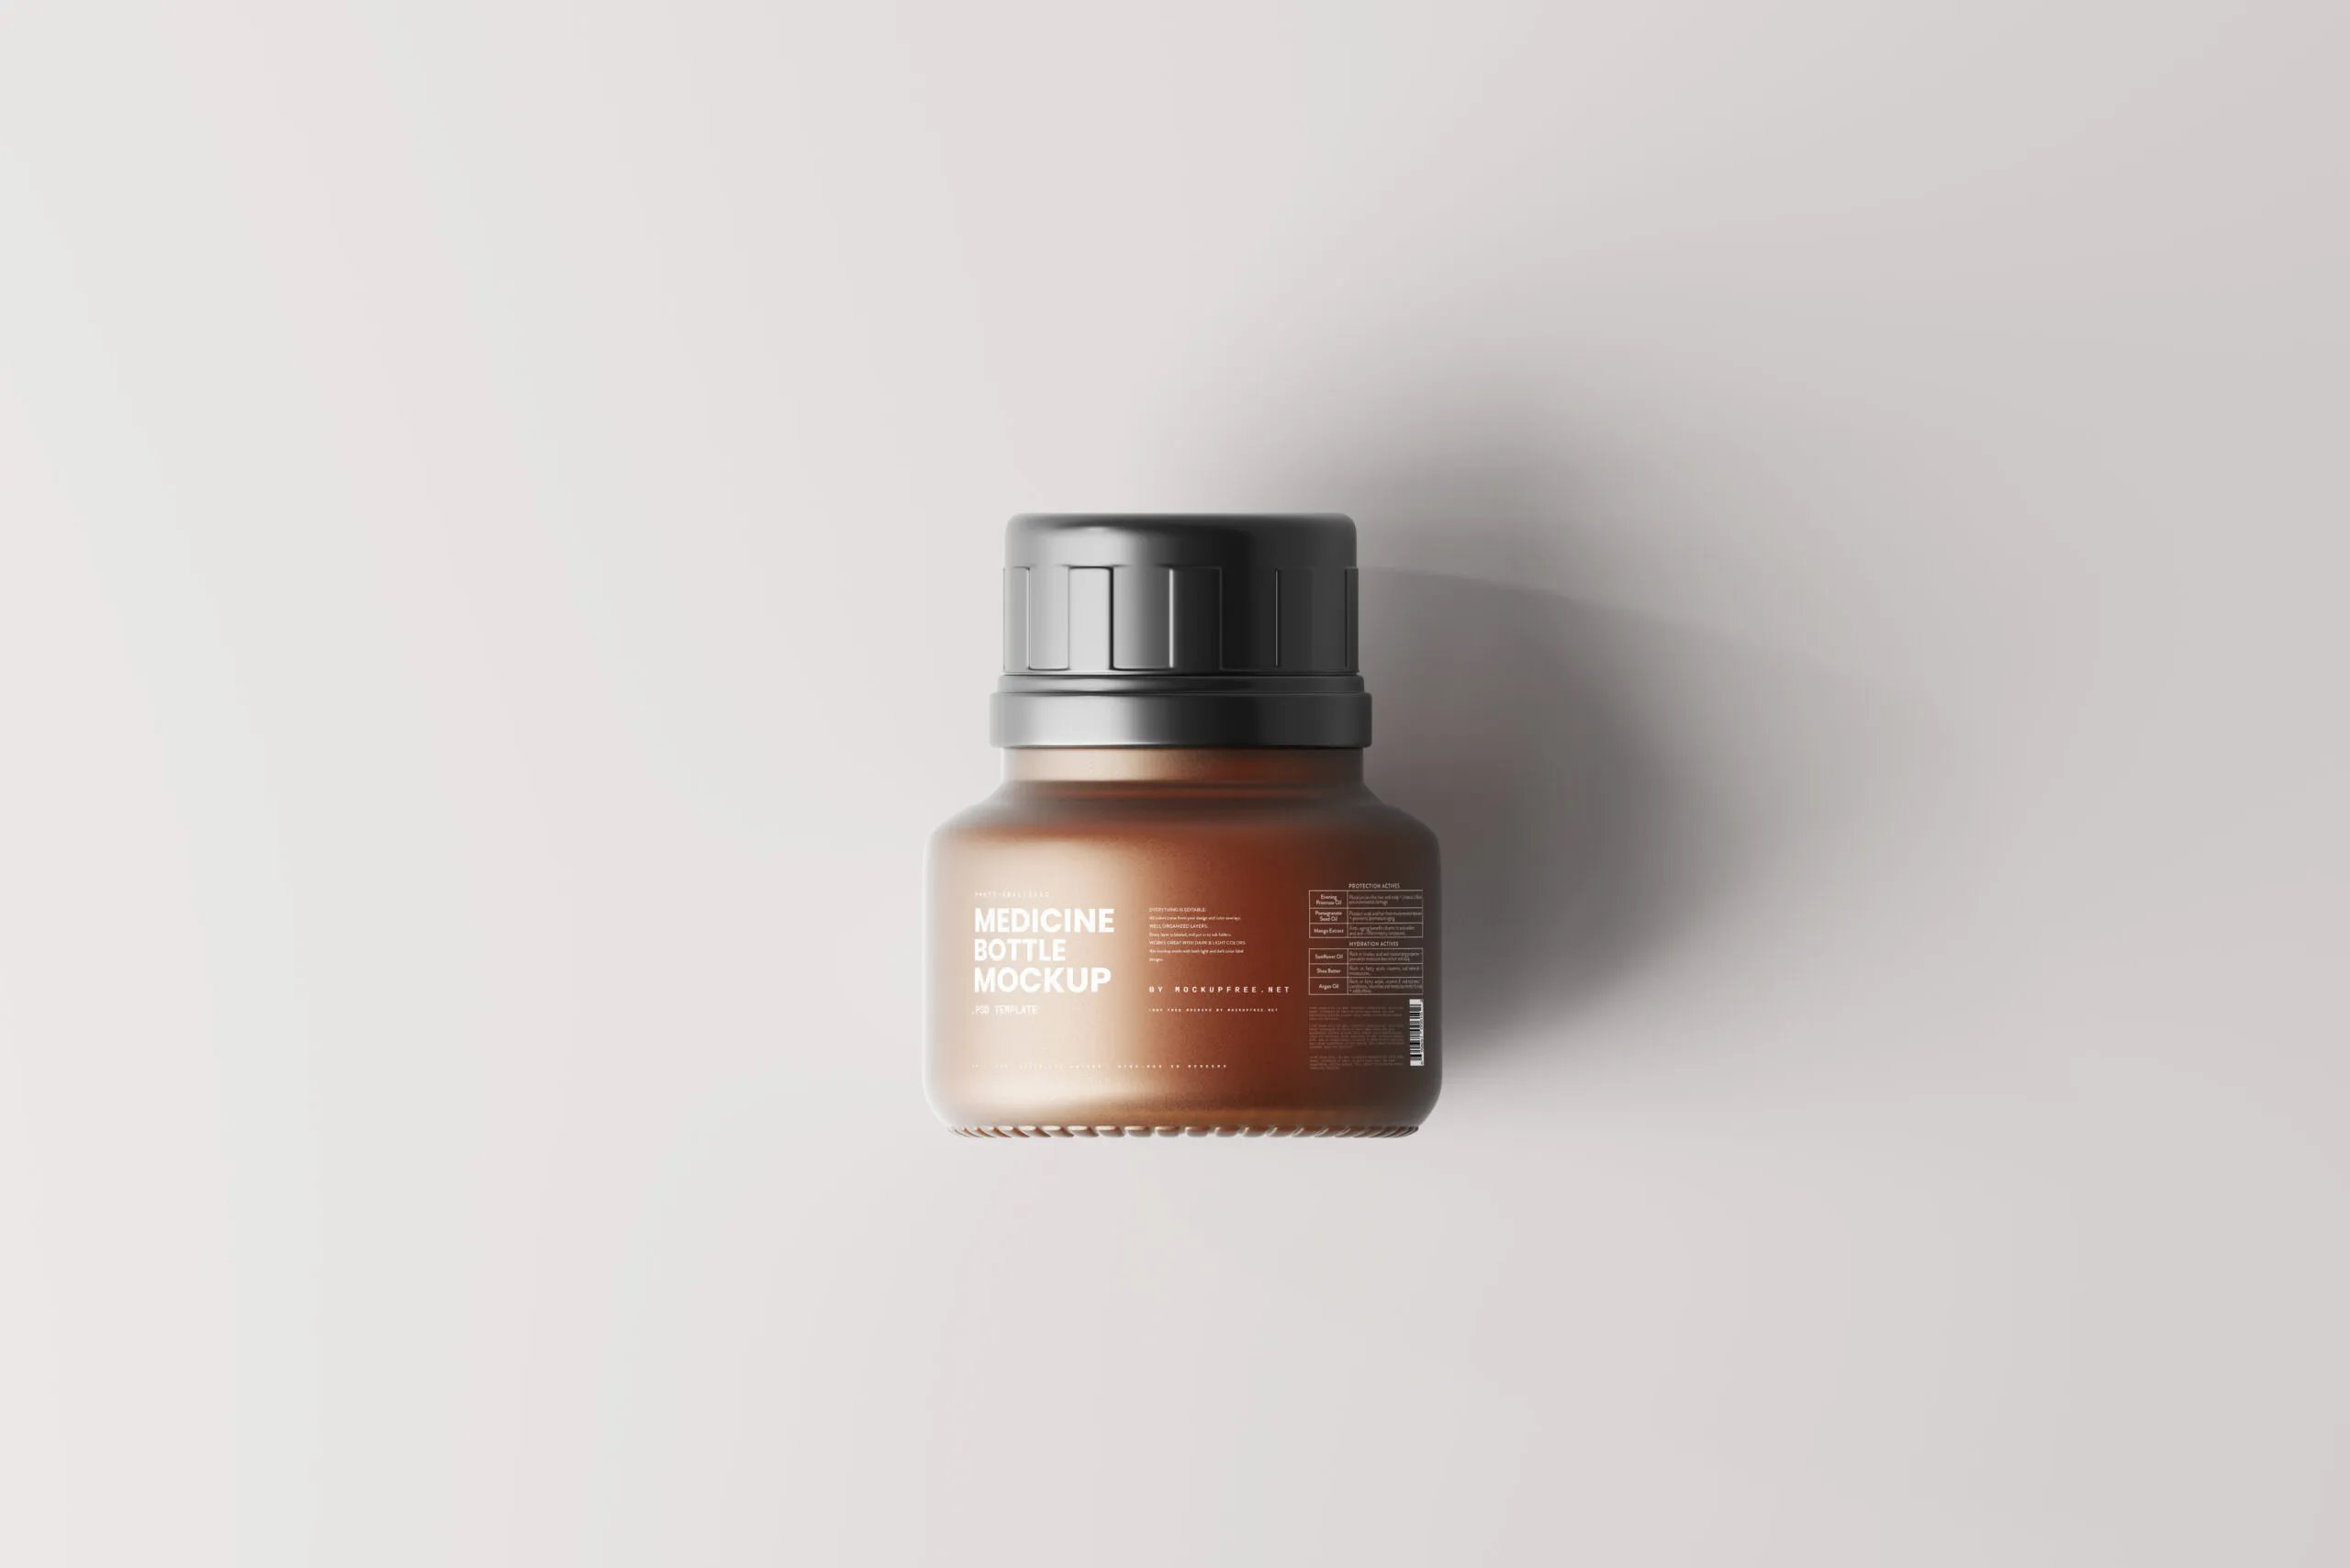 6 Amber Glass Stubby Bottle Mockups with Label in Various Visions FREE PSD